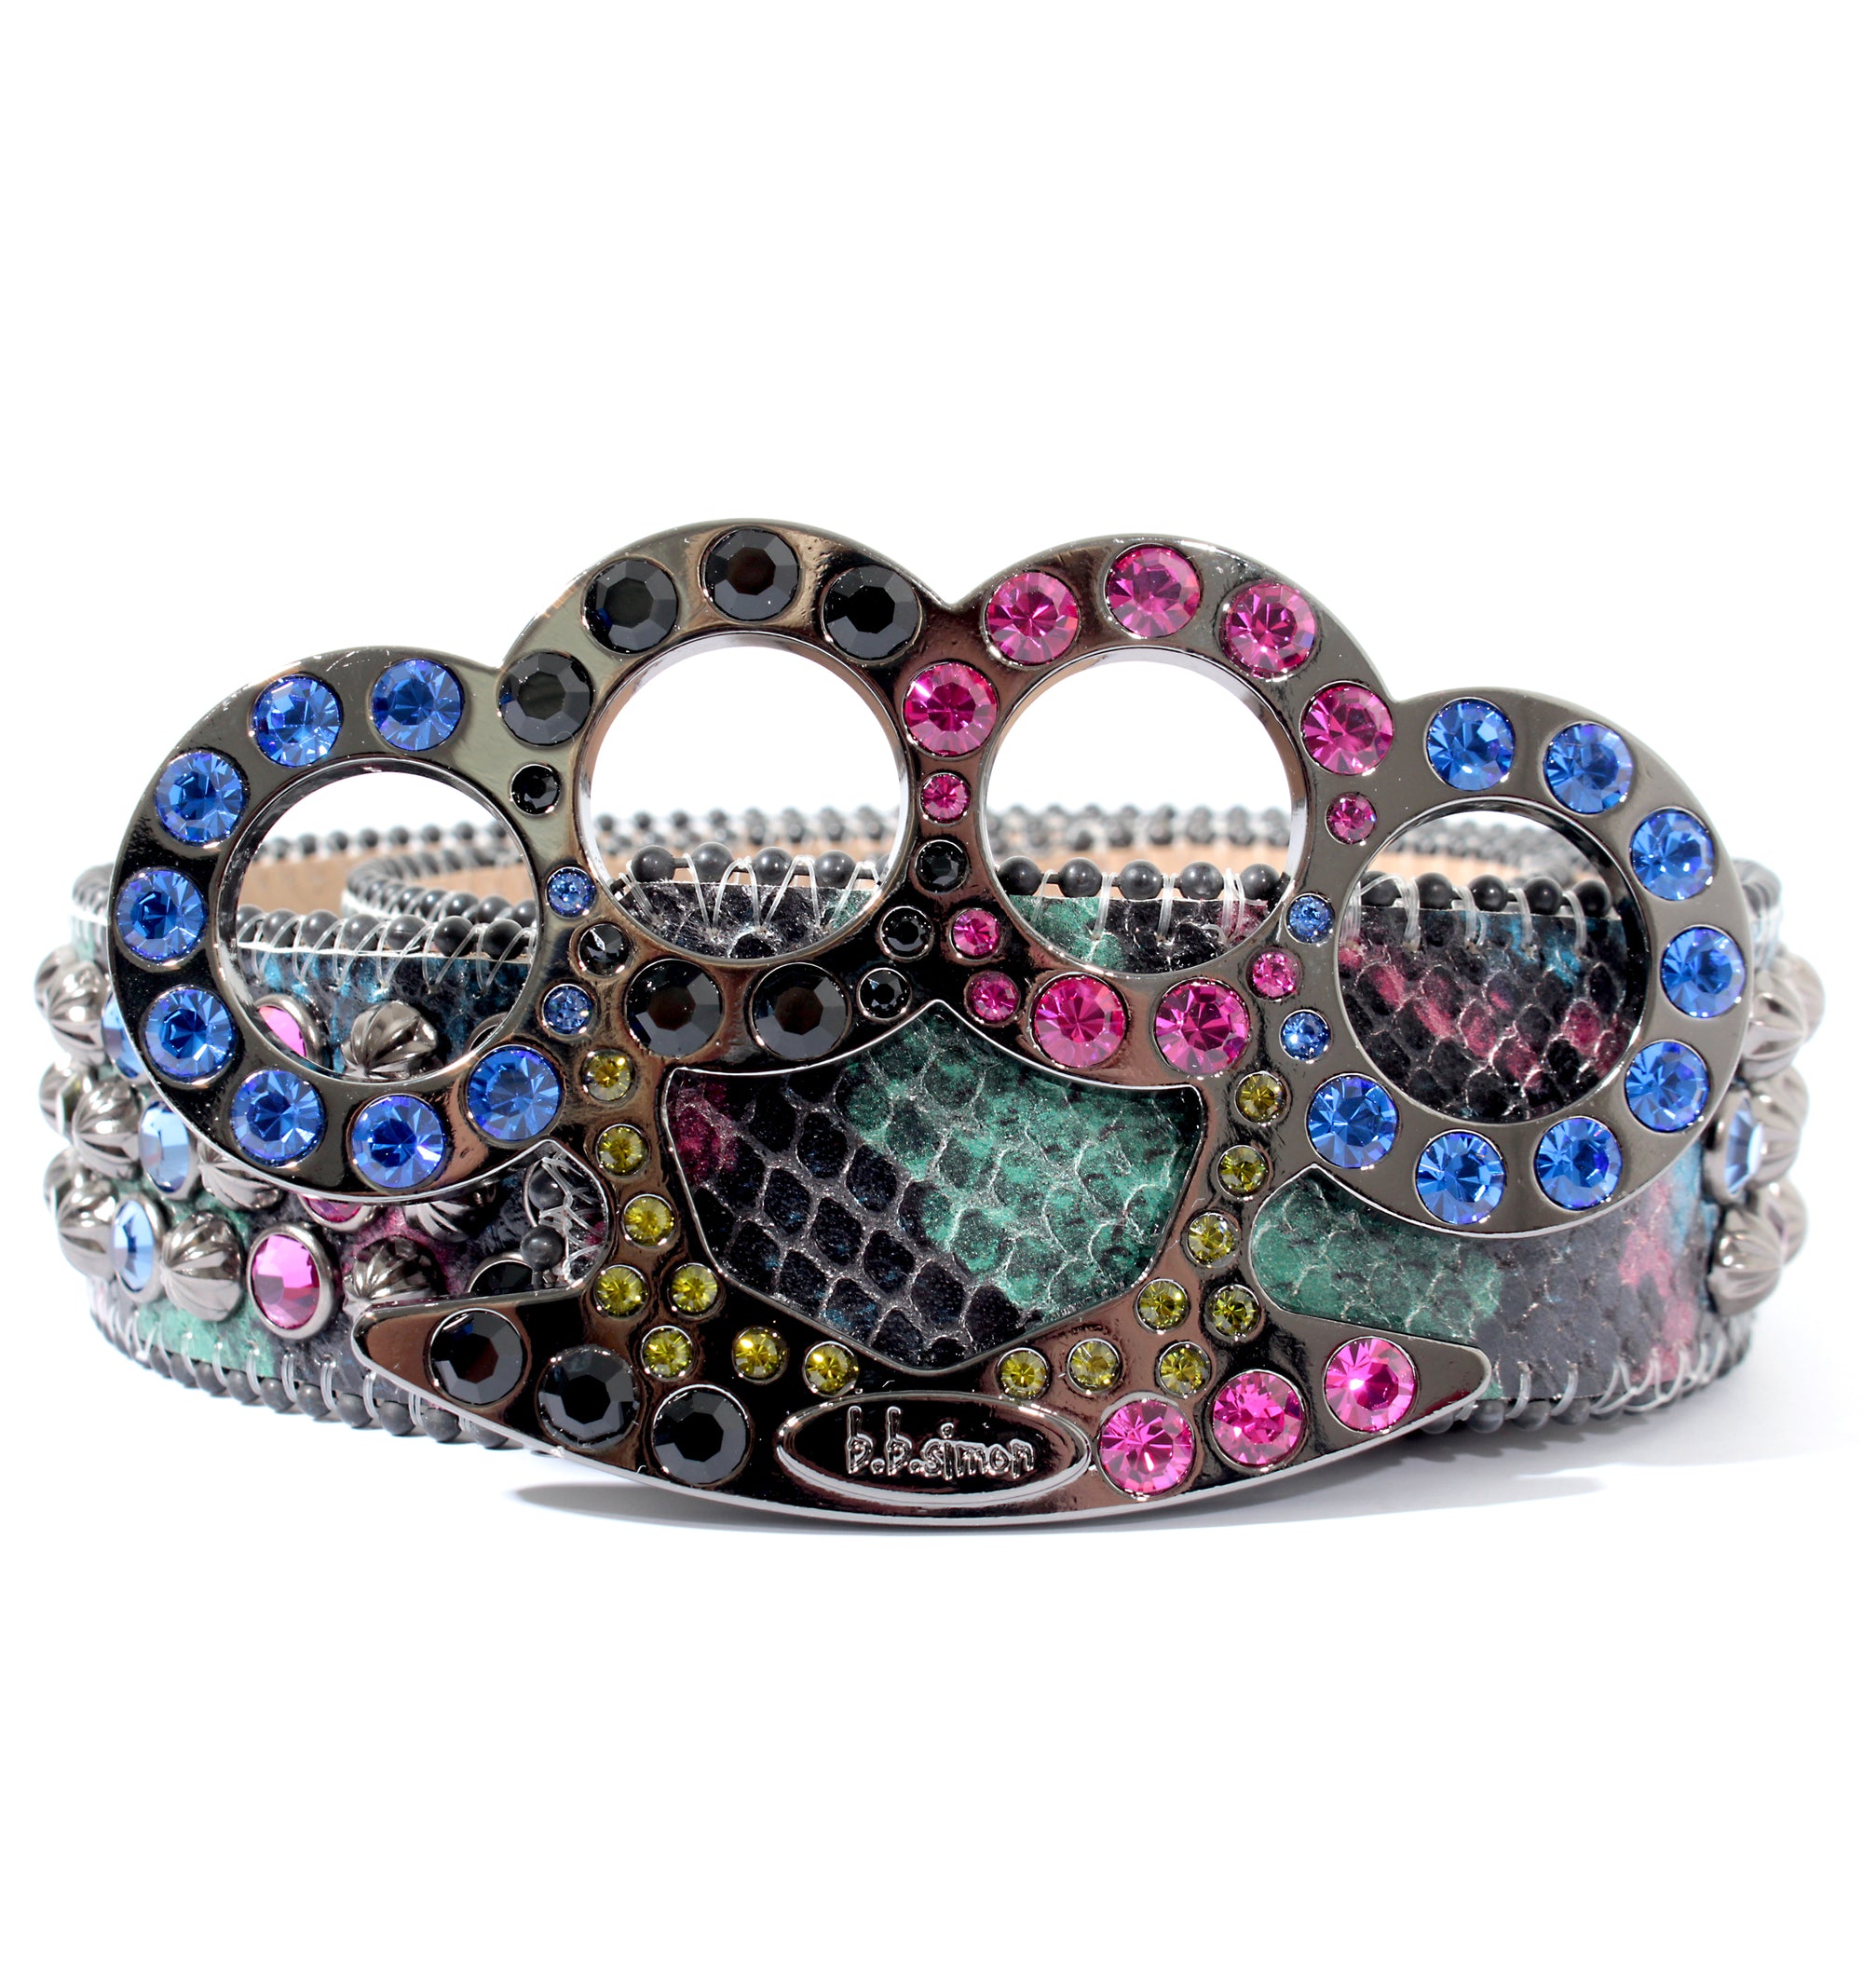 Blue python brass knuckles belt with pink, blue and green crystals